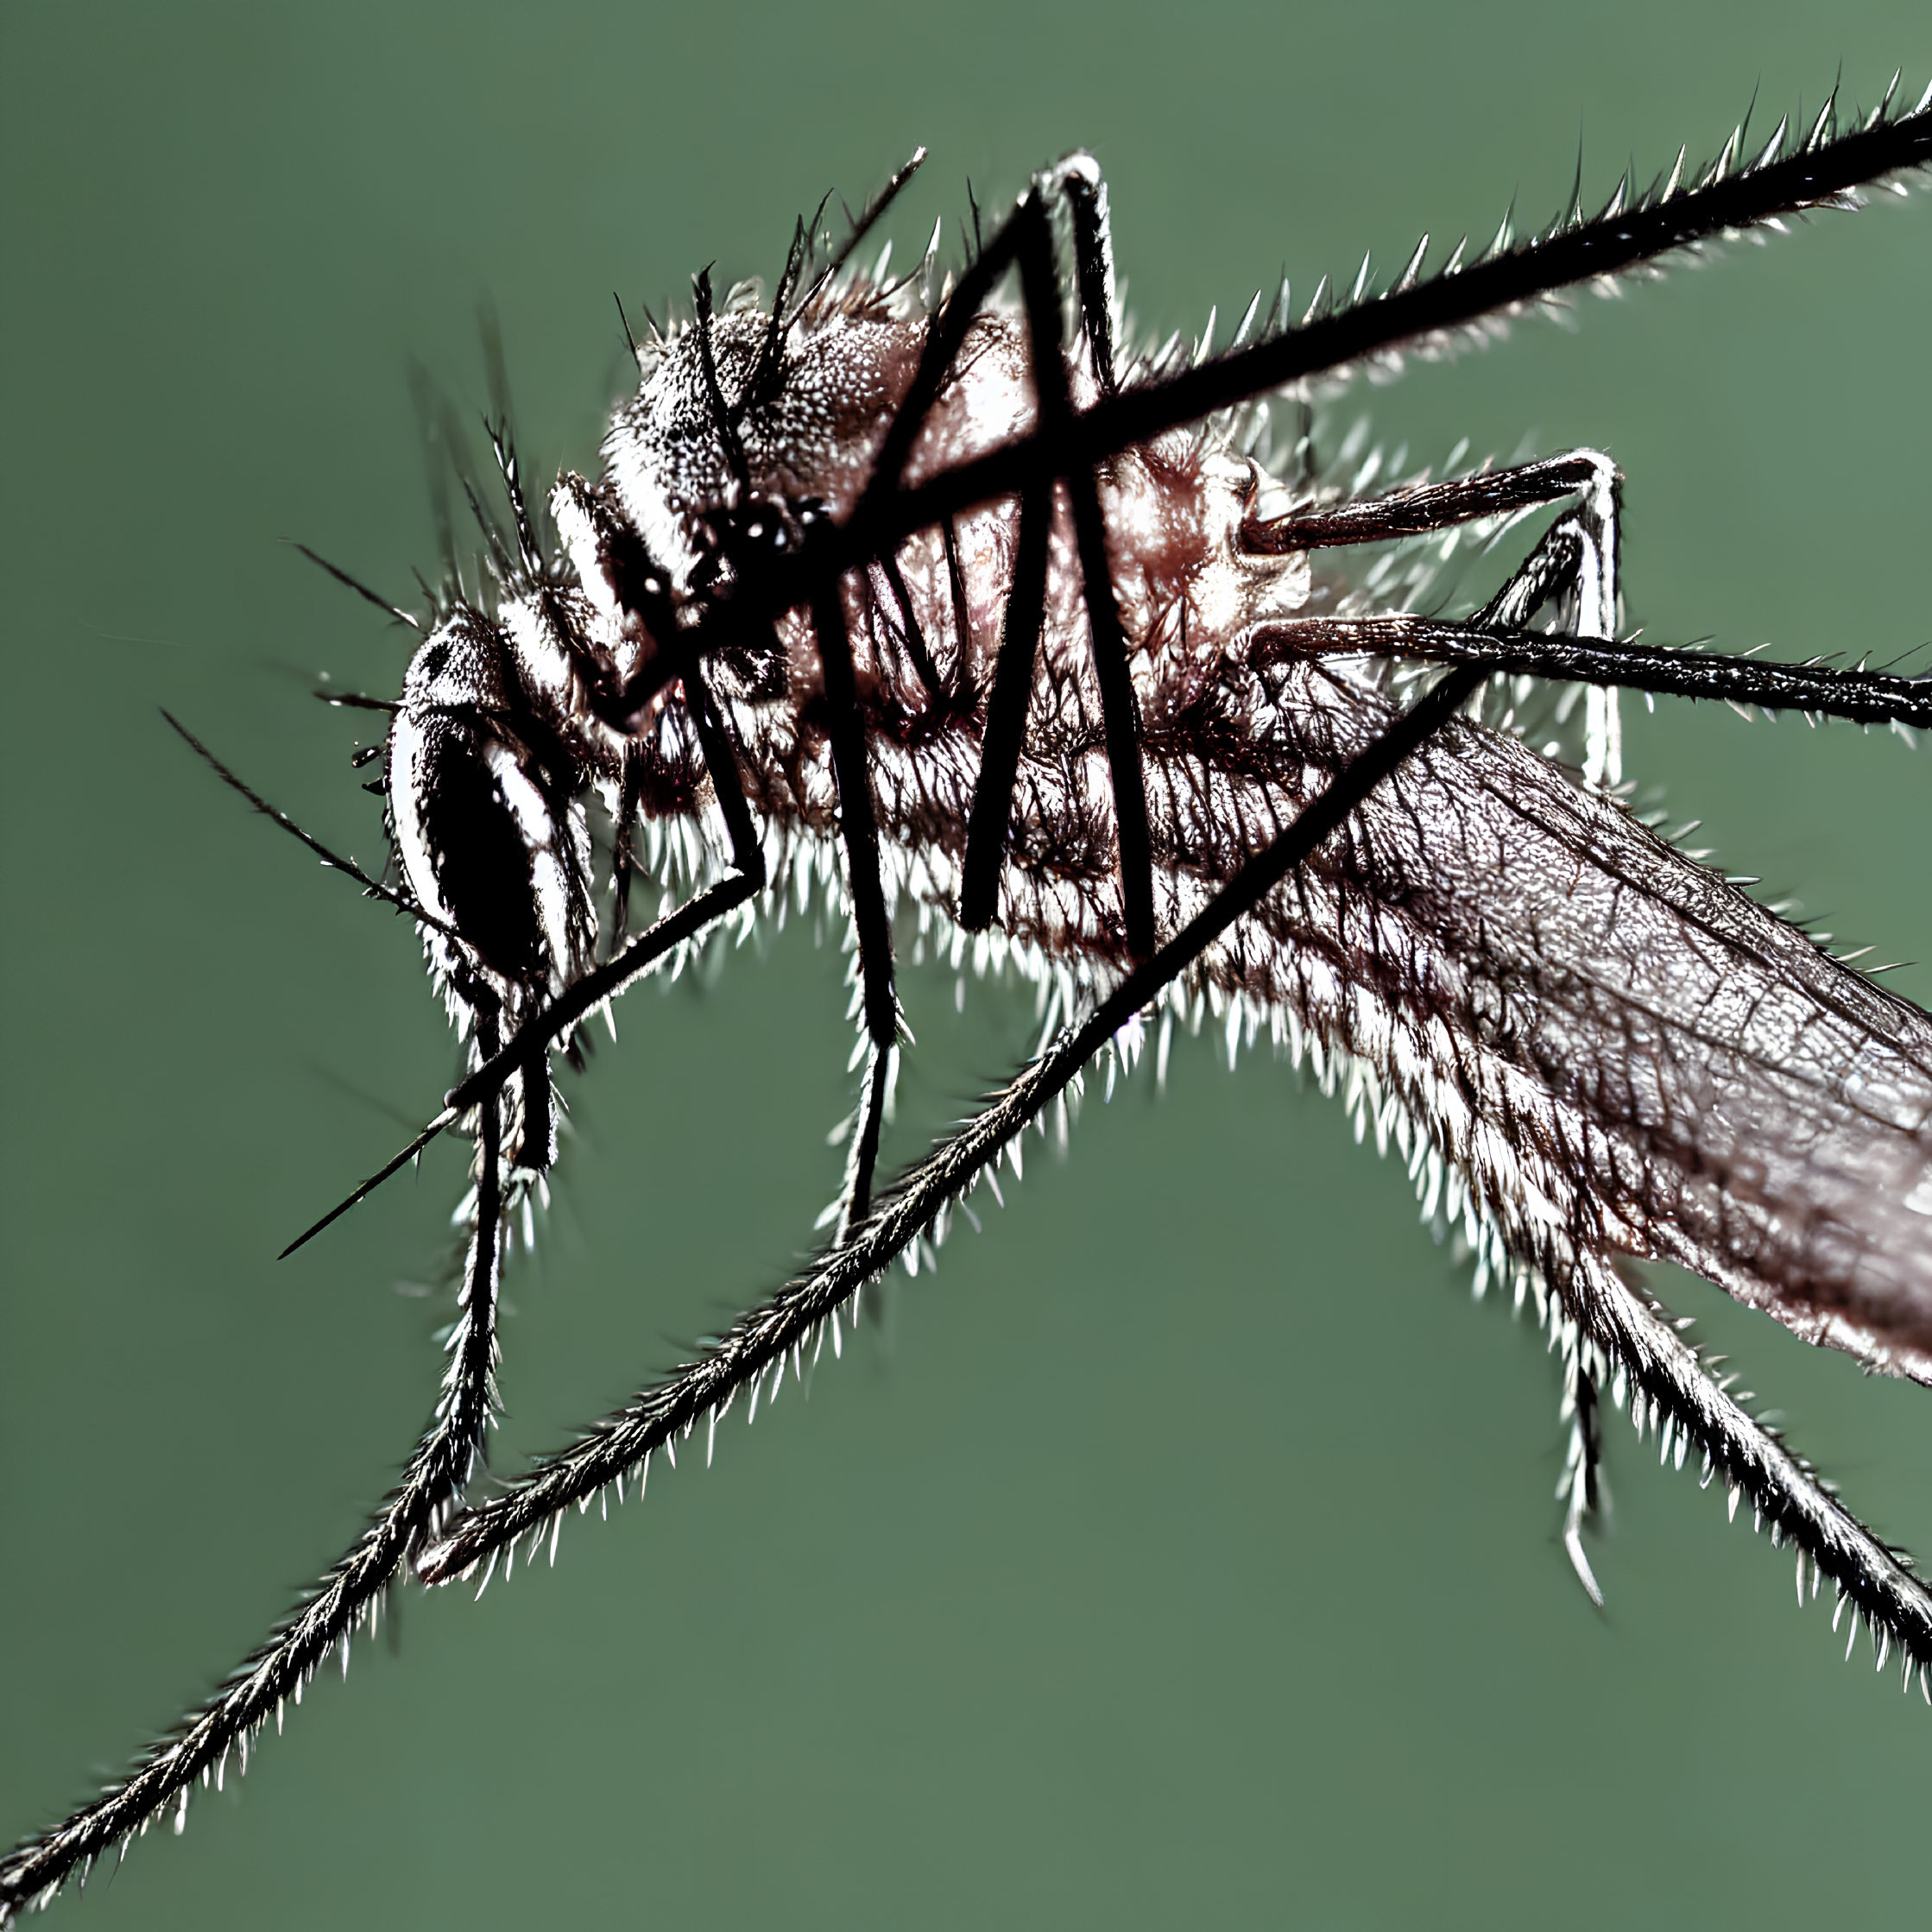 Macro shot of mosquito on green background, highlighting wings and proboscis